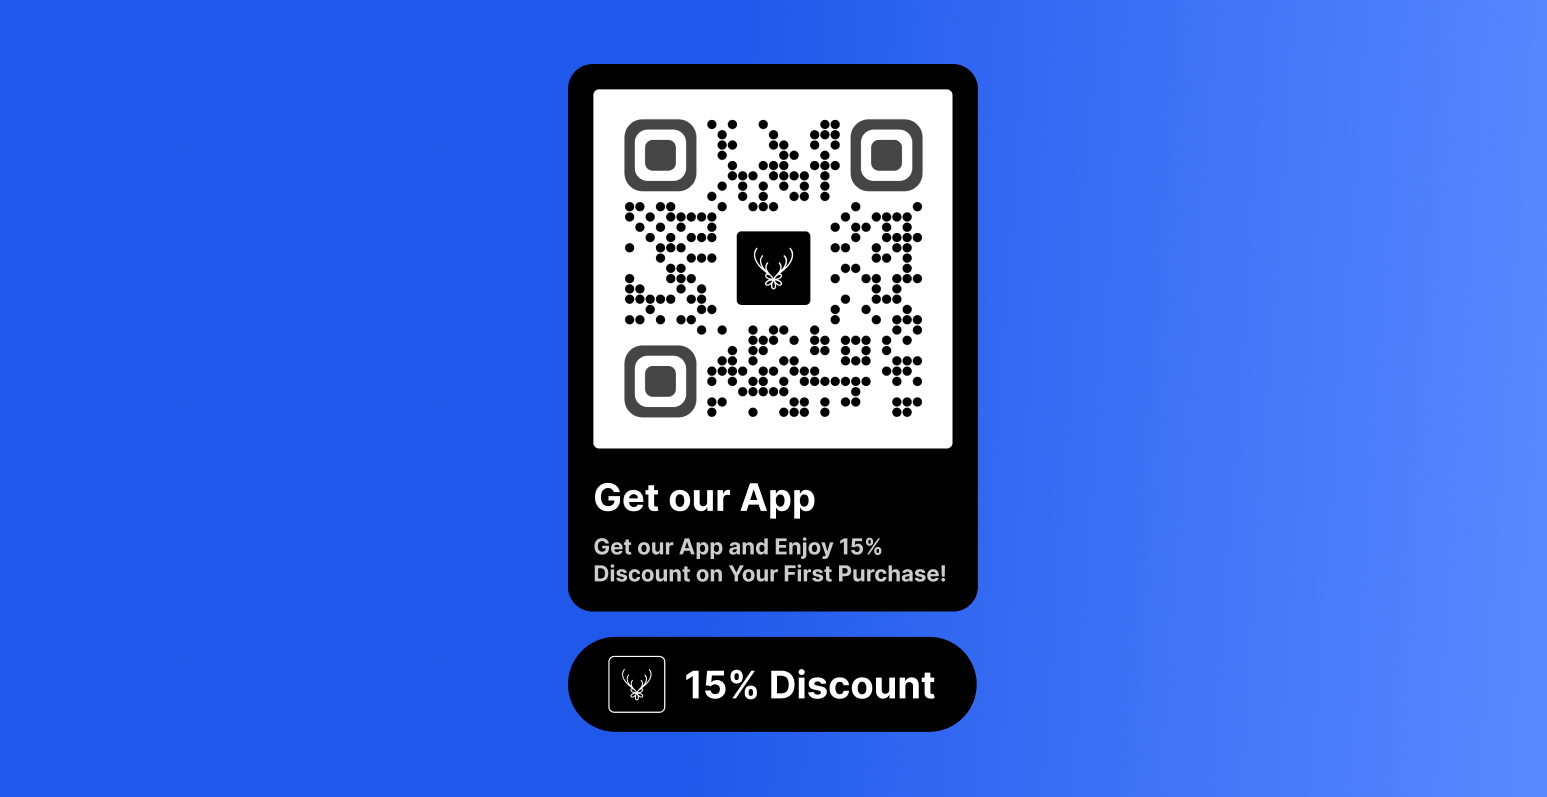 The image features a QR code that can be scanned to download a mobile app created using Napps platform. Next to the QR code, there is a text where they can describe the benefits of downloading the app, such as faster access to products, exclusive promotions, and enhanced user experience. This image demonstrates how Napps customers can leverage QR codes to promote their mobile app and incentivize their customers to download it.